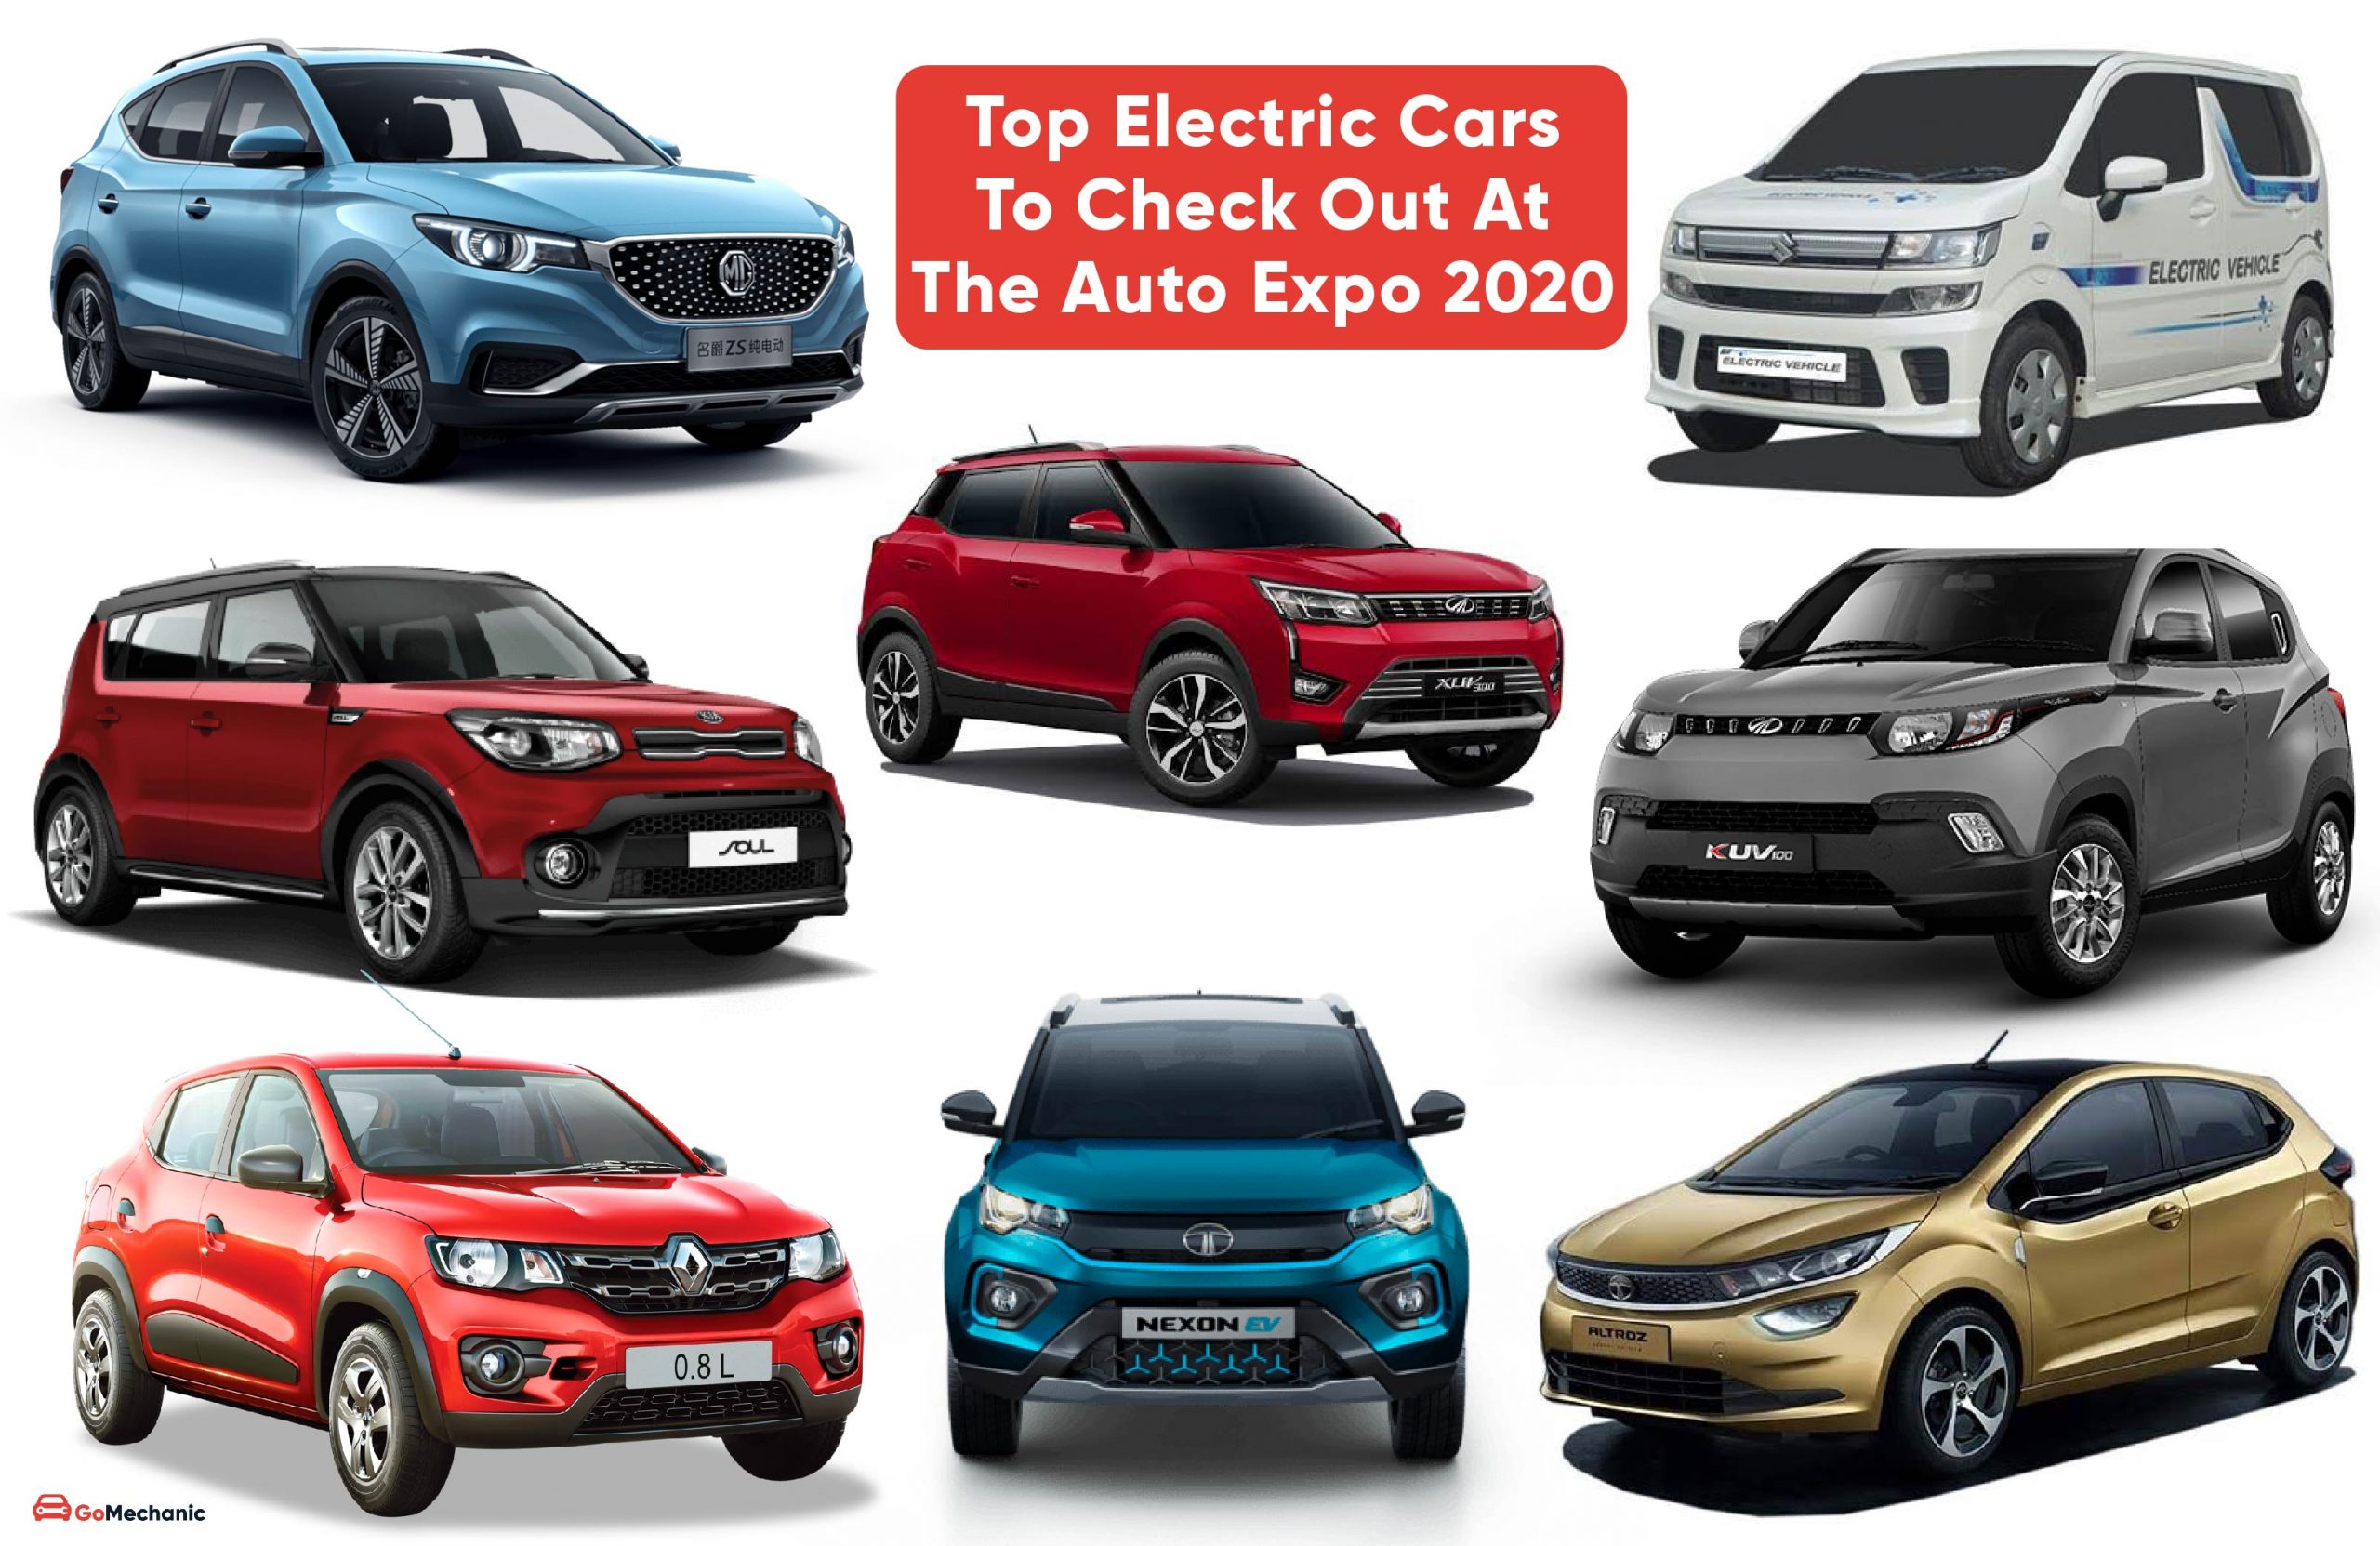 8 Most Awaited Electric Cars at the Auto Expo 2020